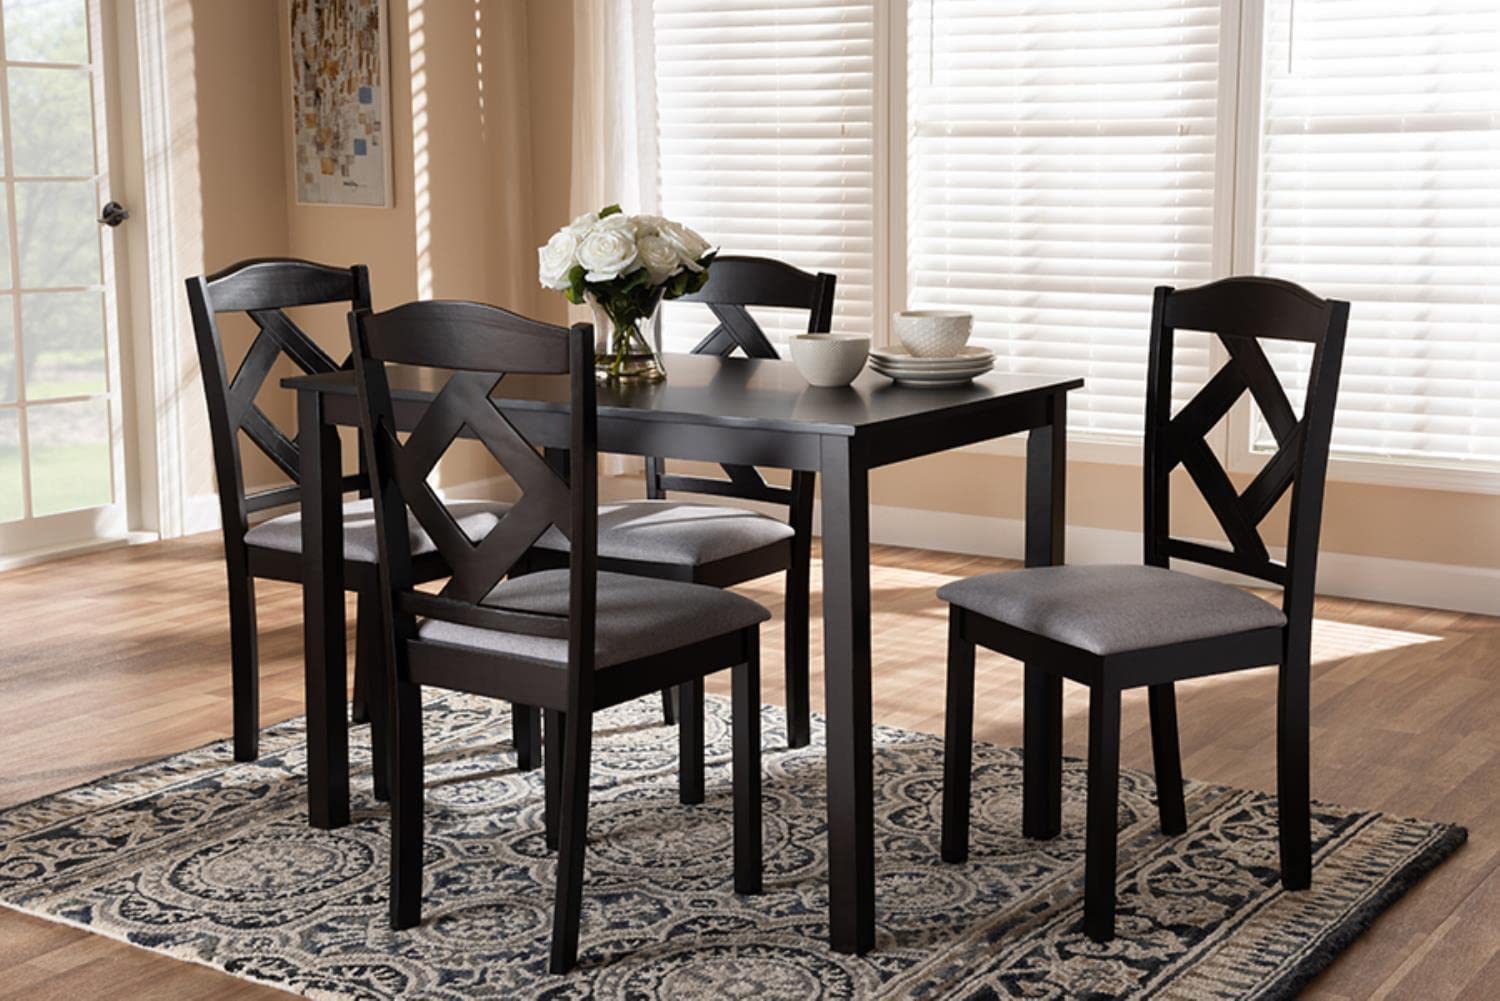 Baxton Studio 5-Piece Dining Set with Bench